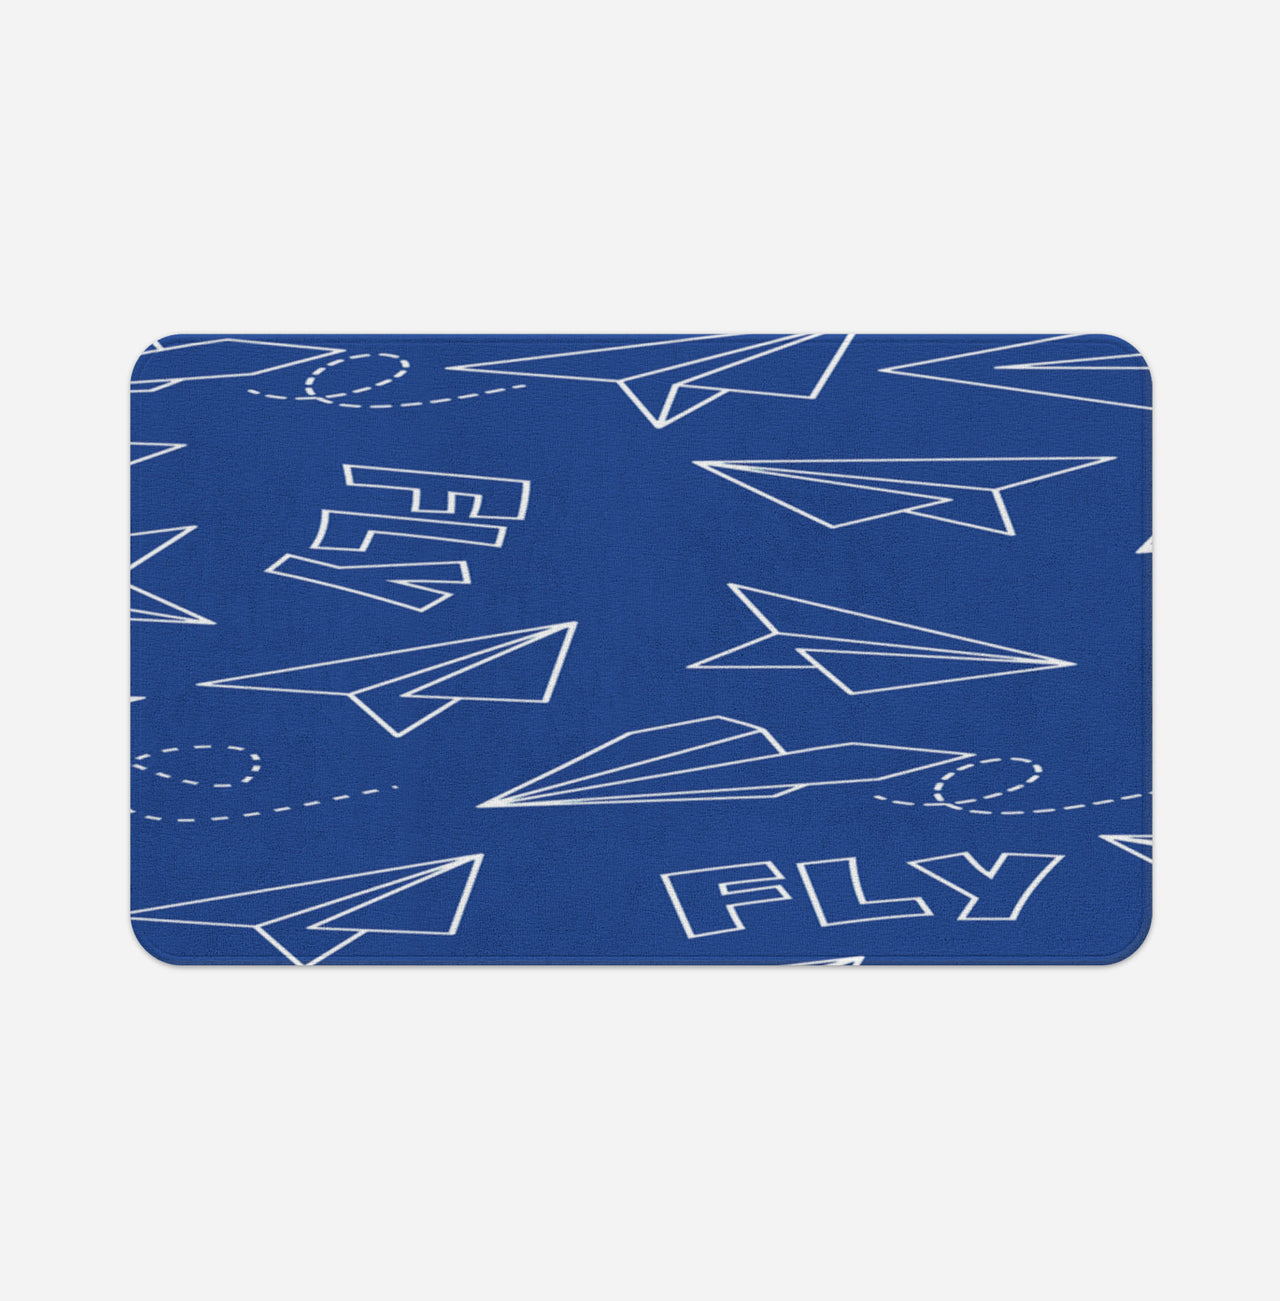 Paper Airplane & Fly-Blue Designed Bath Mats